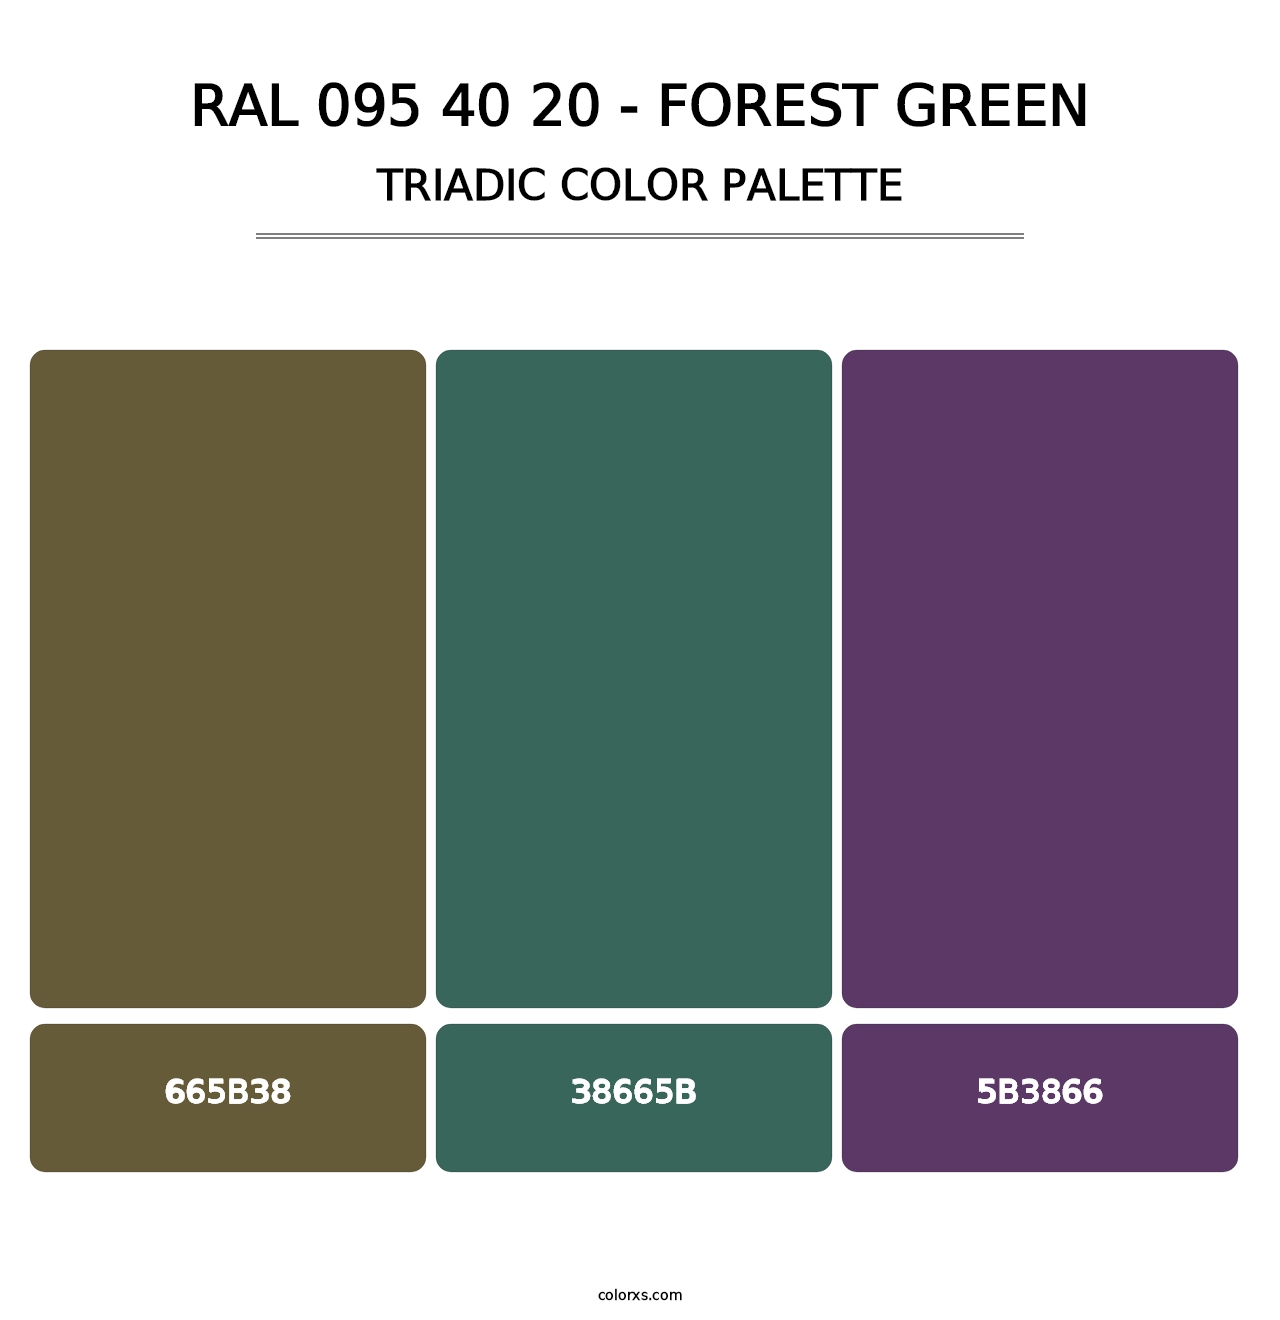 RAL 095 40 20 - Forest Green - Triadic Color Palette